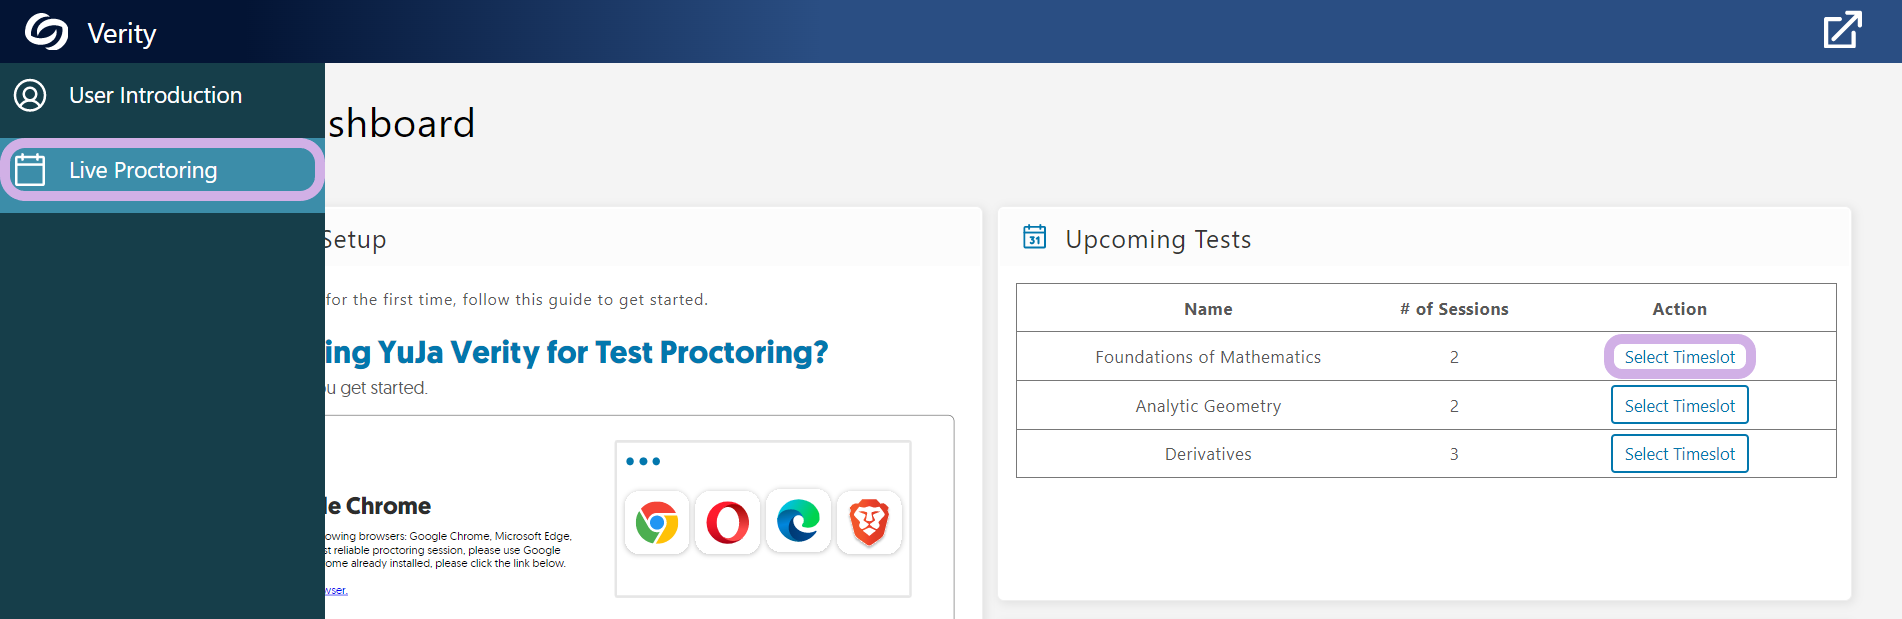 The student dashboard for Verity featuring the Live Procotring tab with upcoming tests panel populated.